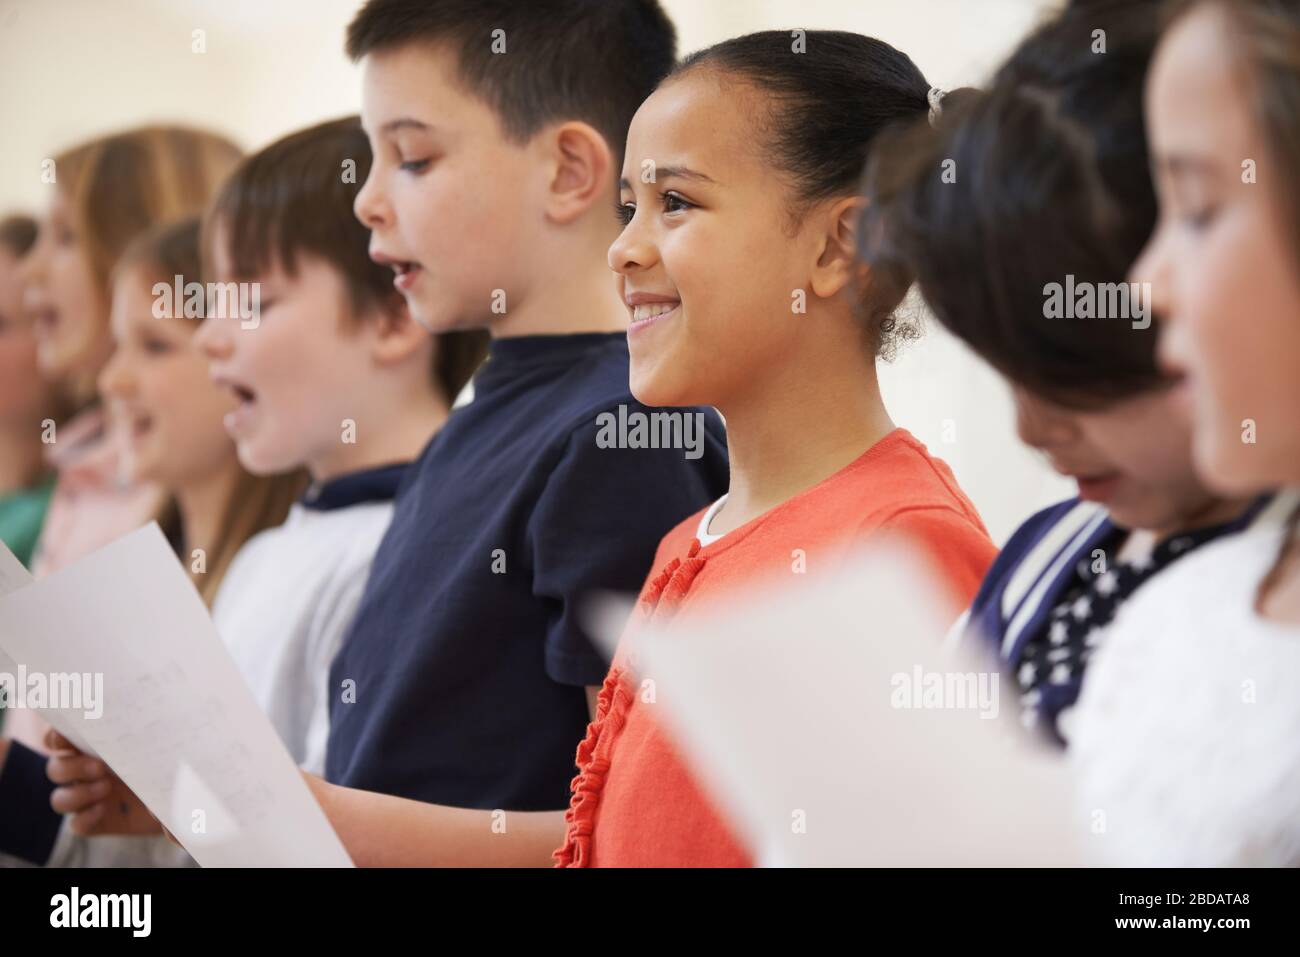 Group Of School Children Singing In Choir At Stage School Together Stock Photo